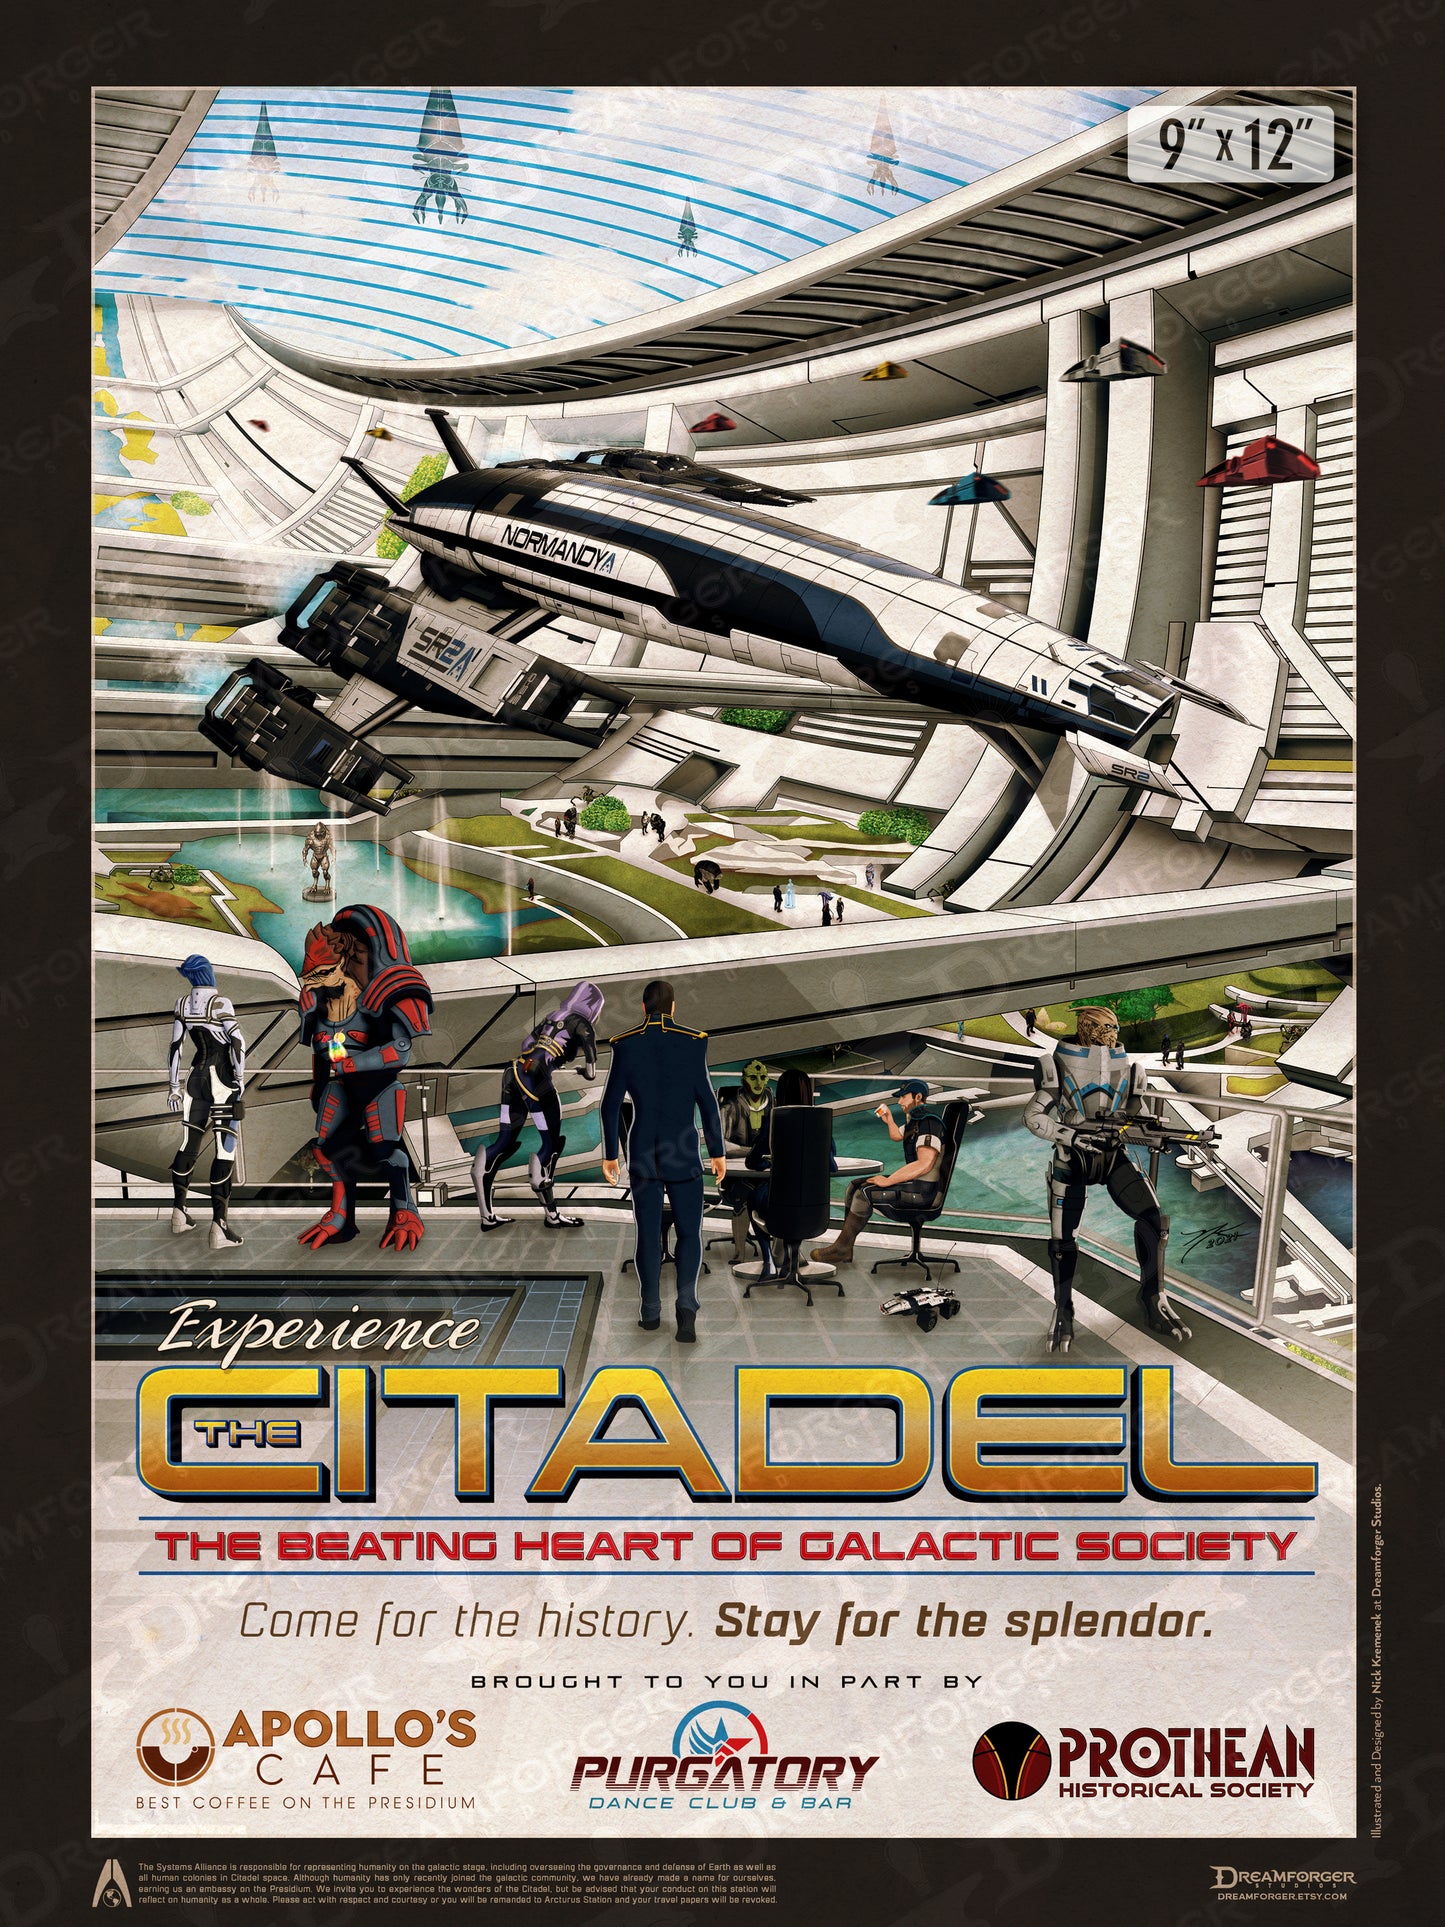 ME "Experience the Citadel" Travel Poster